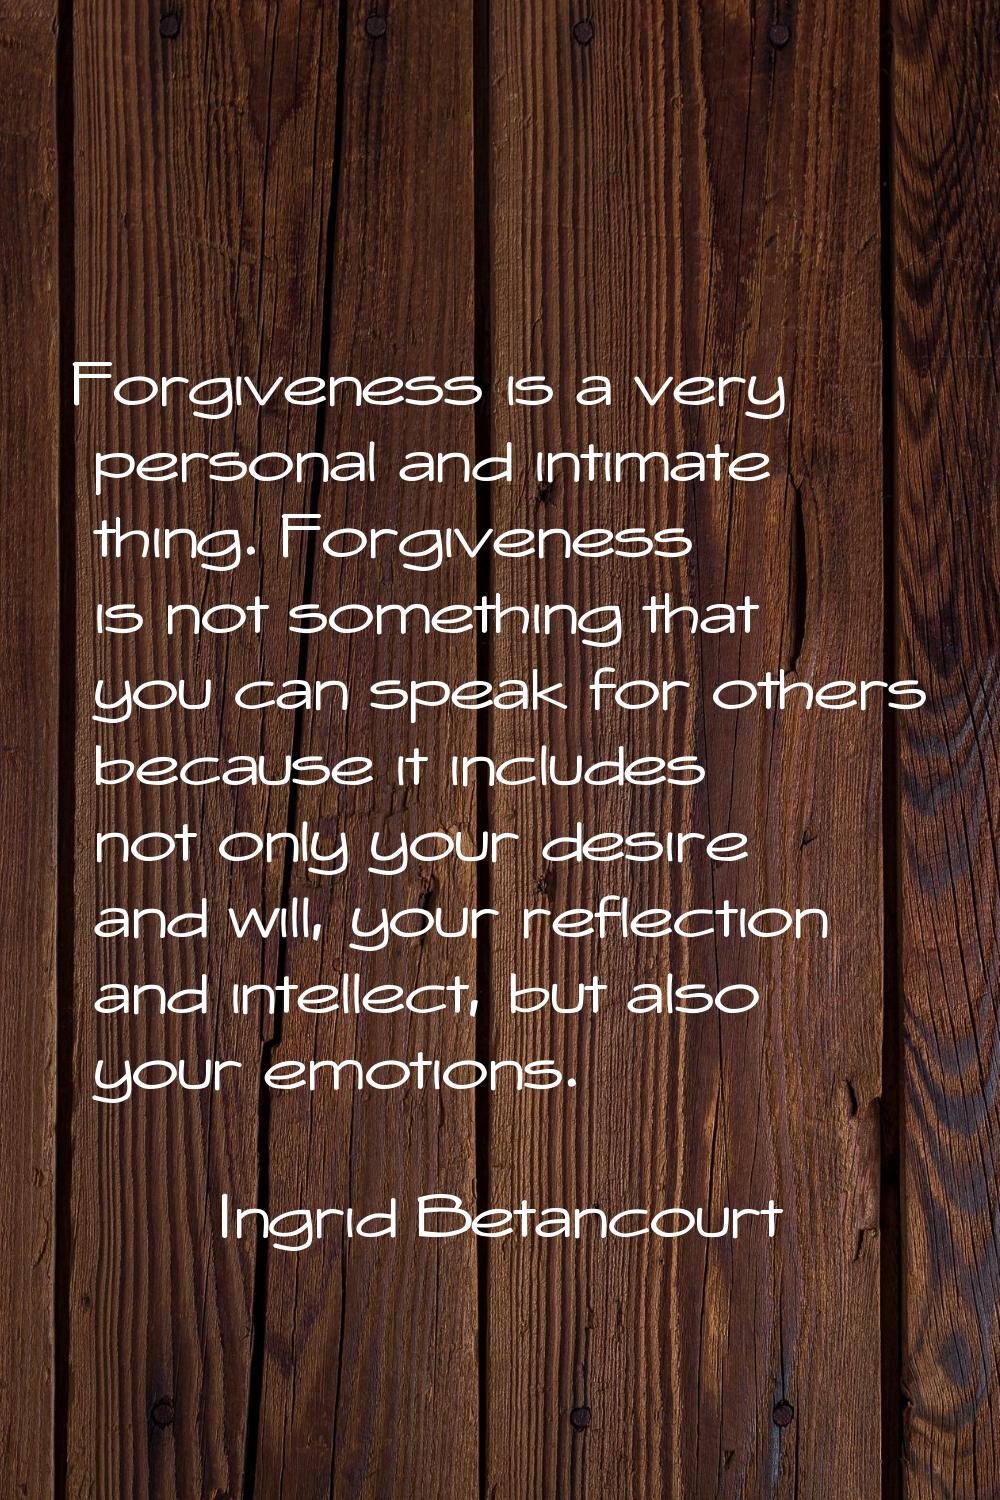 Forgiveness is a very personal and intimate thing. Forgiveness is not something that you can speak 